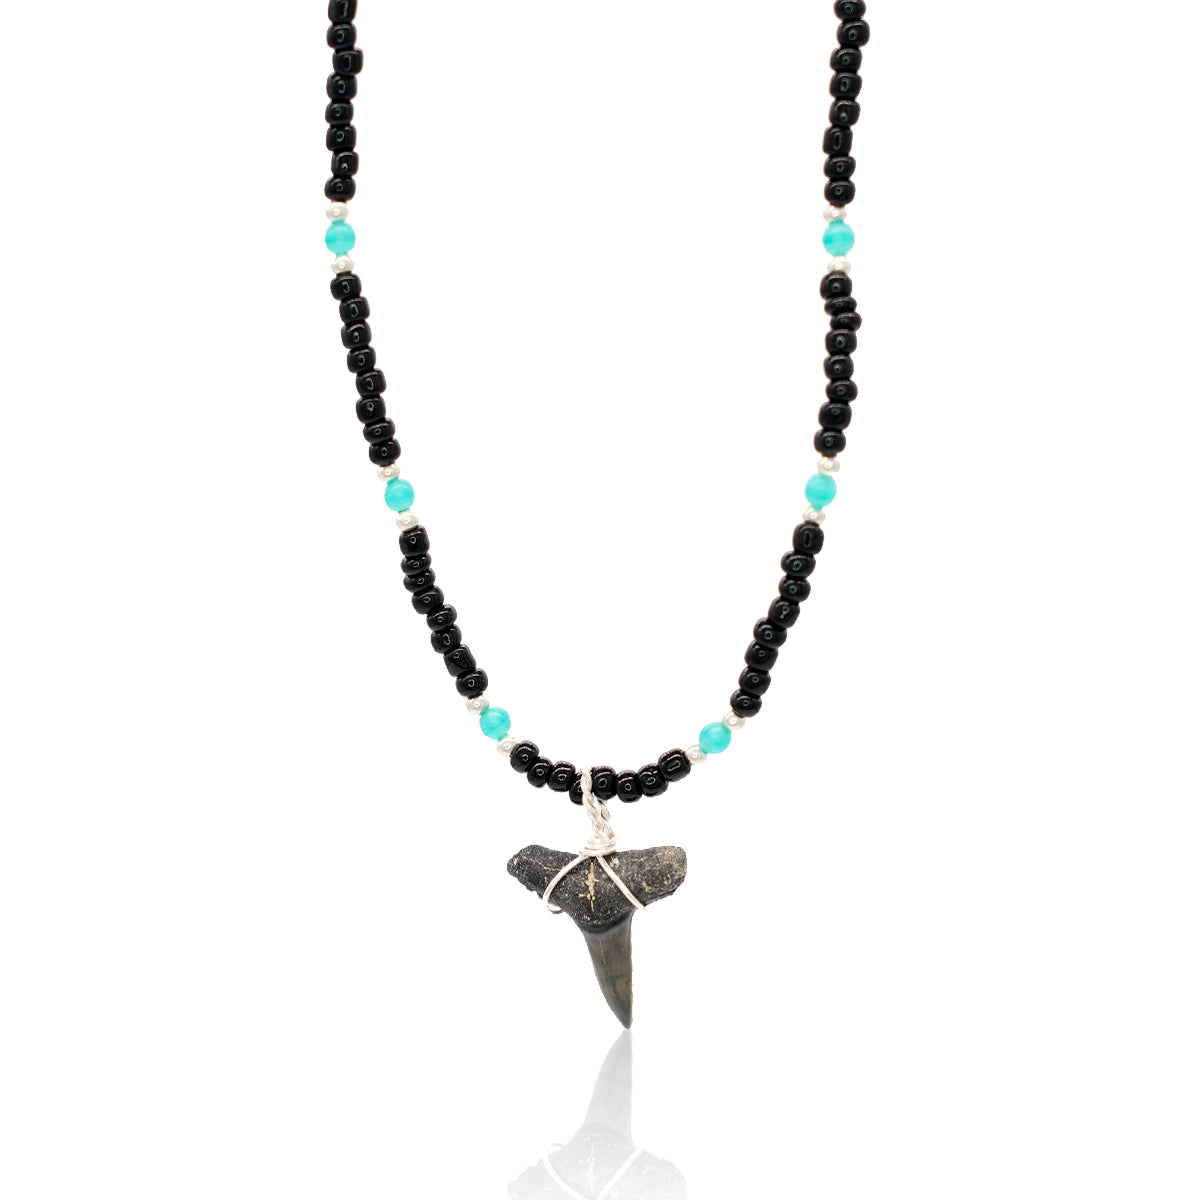 Fossilized Lemon Shark Tooth on Black & Blue Glass Bead Necklace